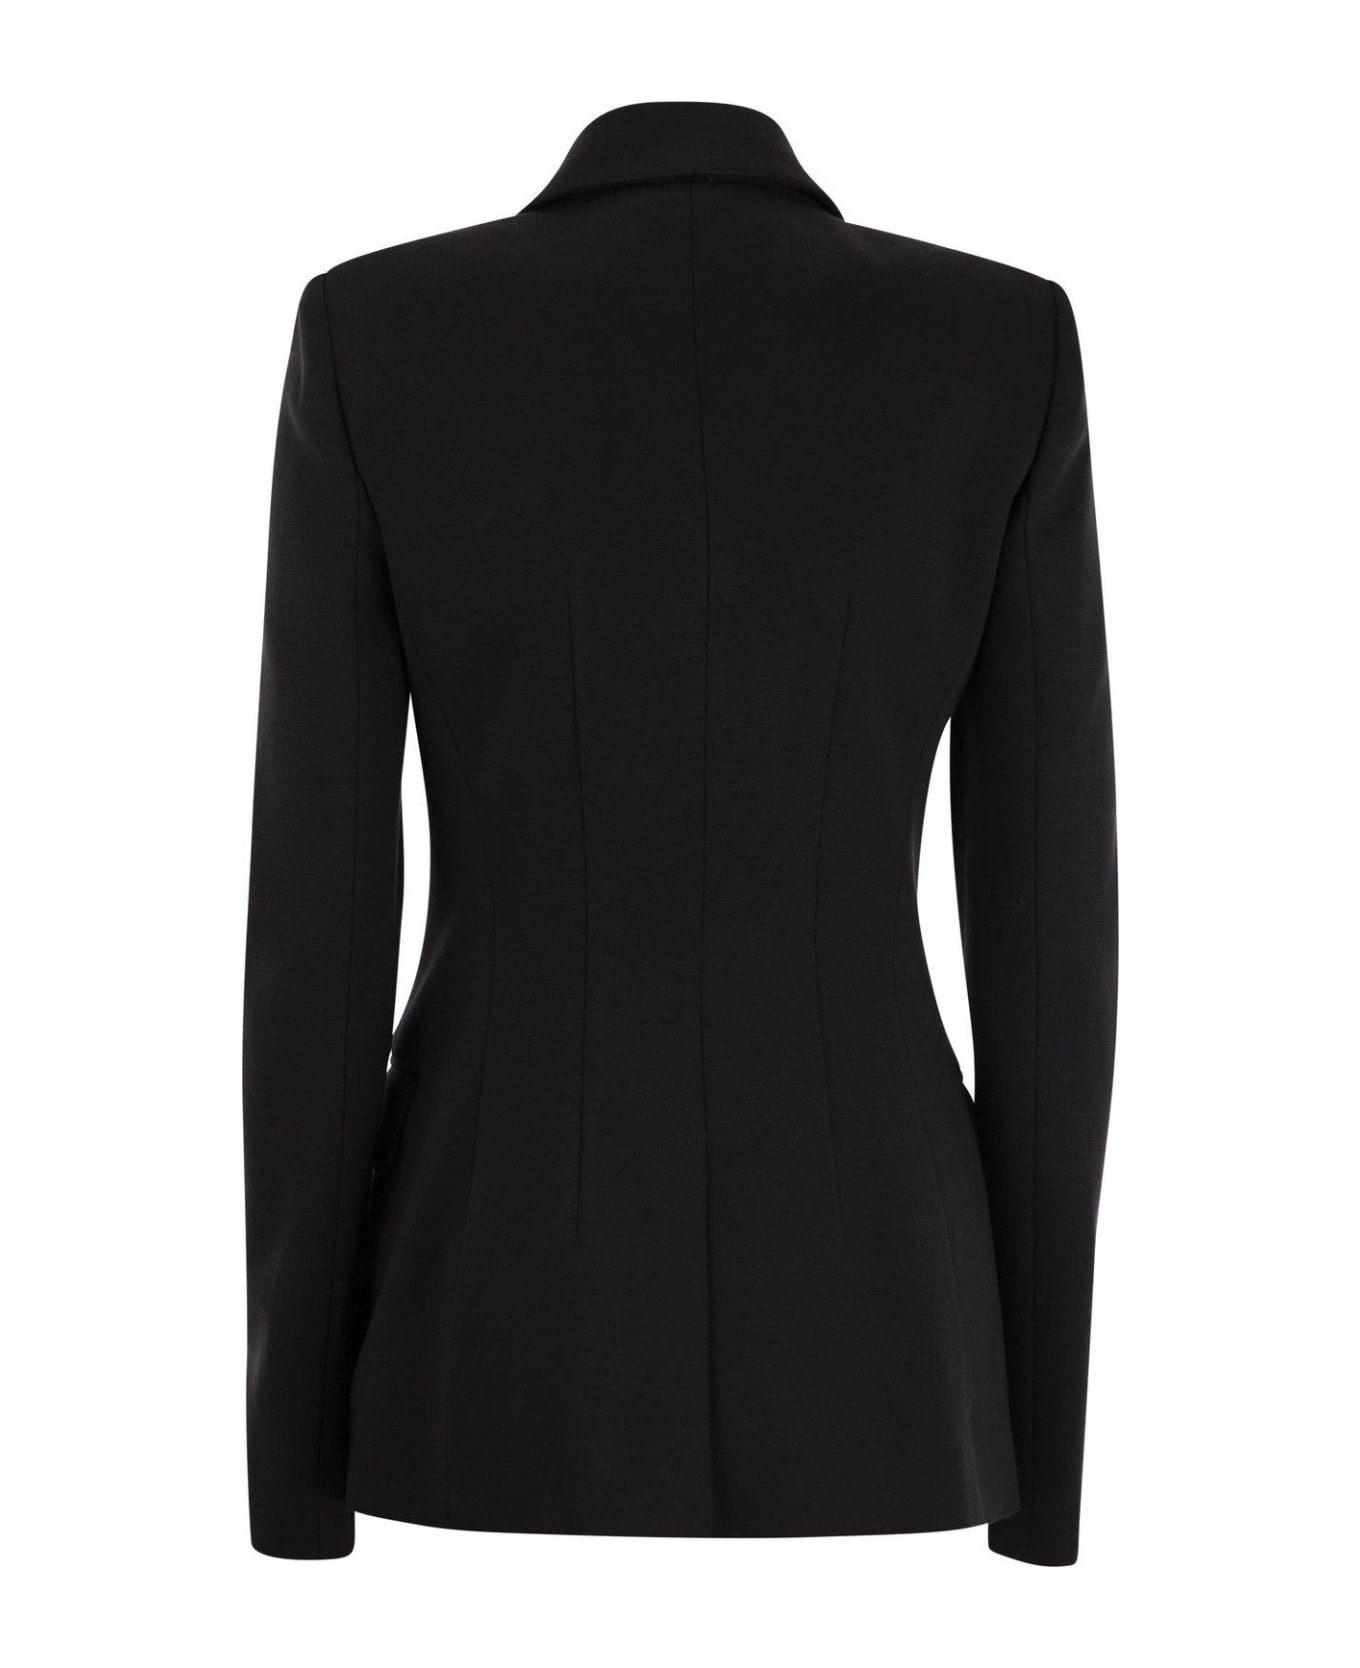 SportMax Double-breasted Long-sleeved Jacket - Nero コート